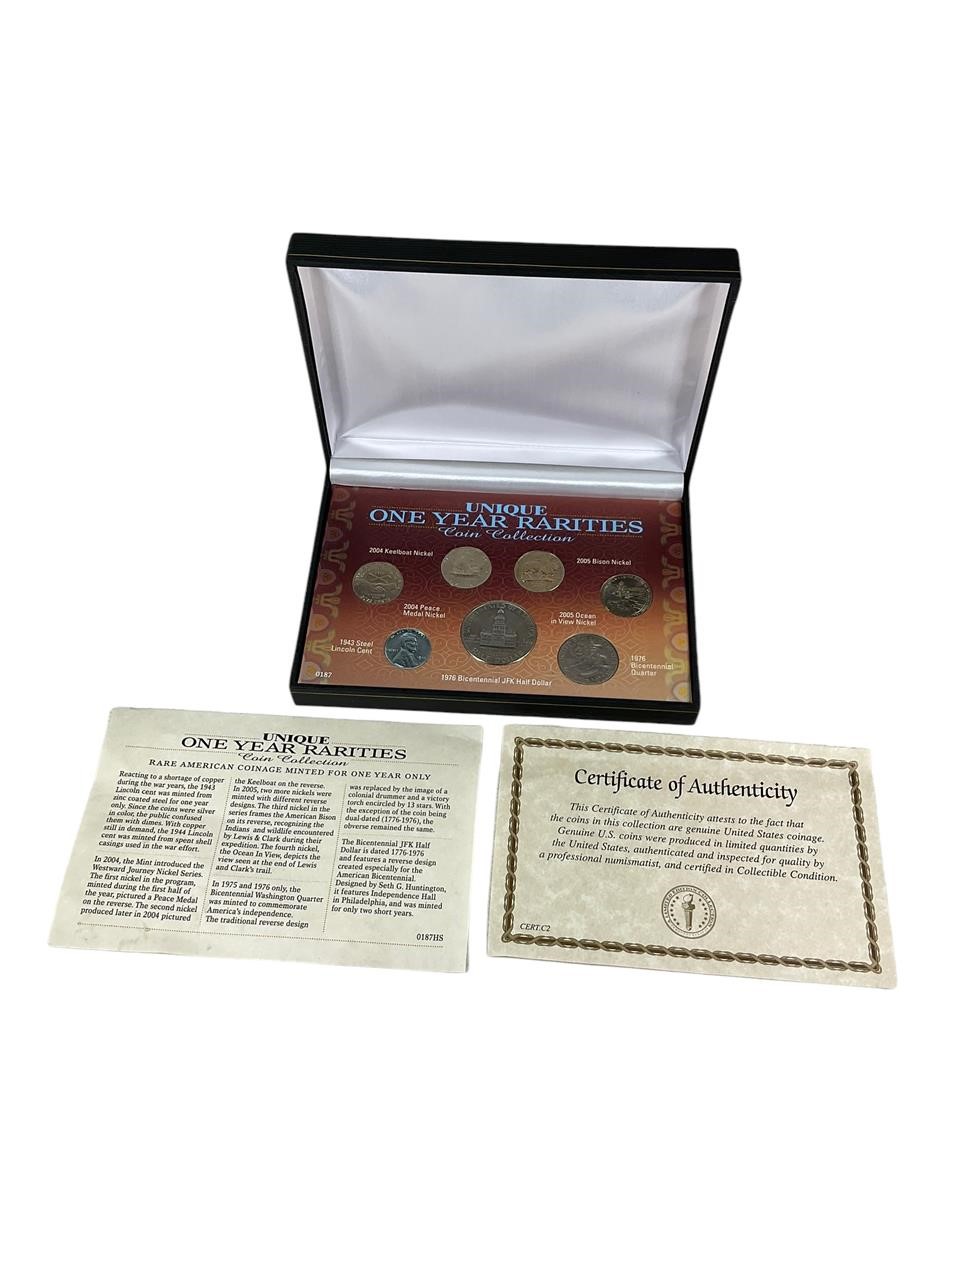 Unique One Year Rarities 7 Coin Set